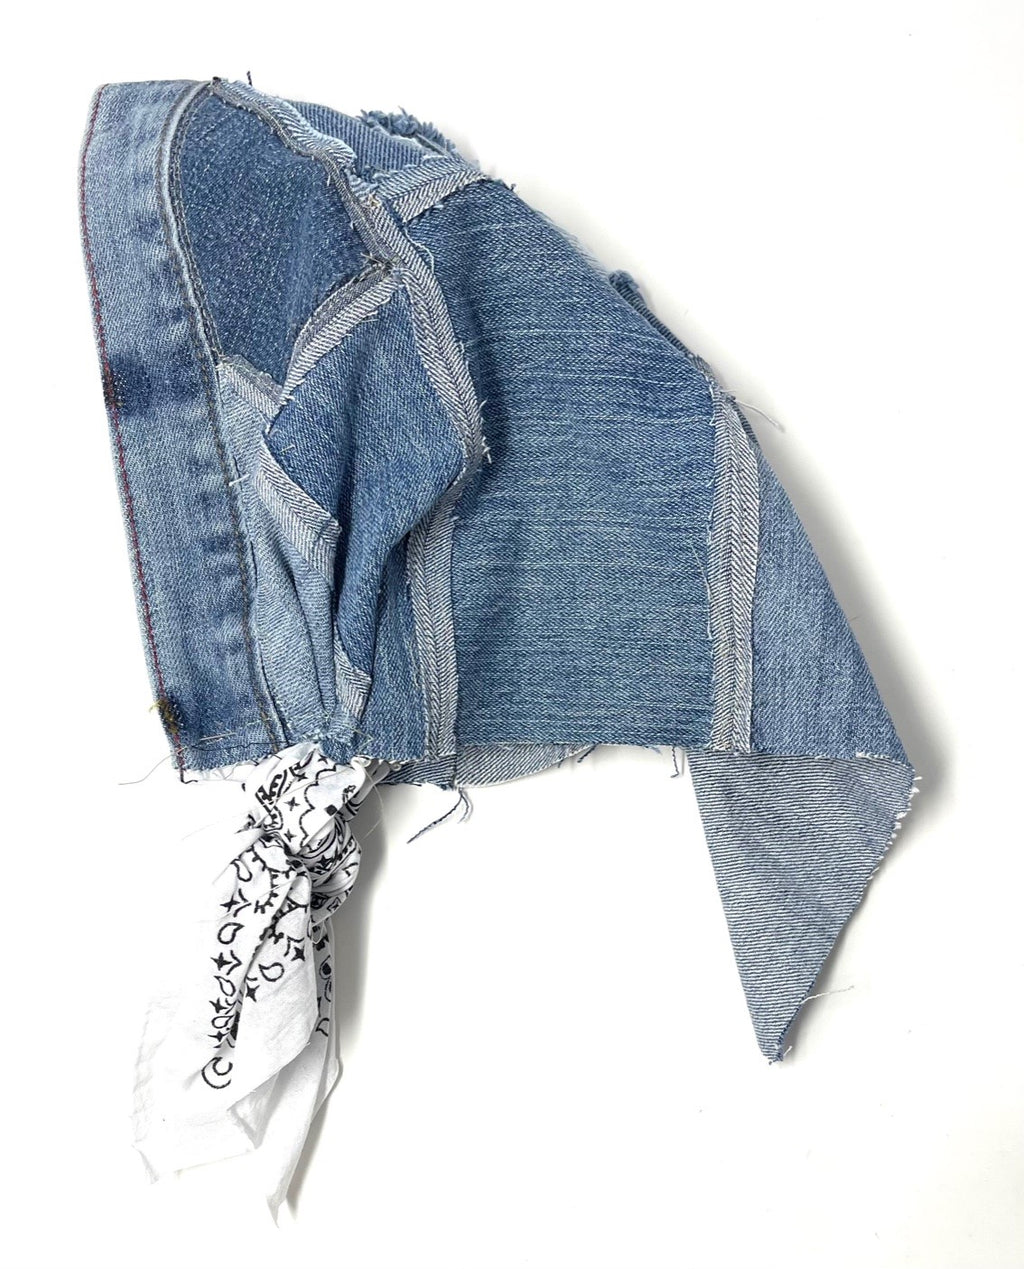 patched denim scarf